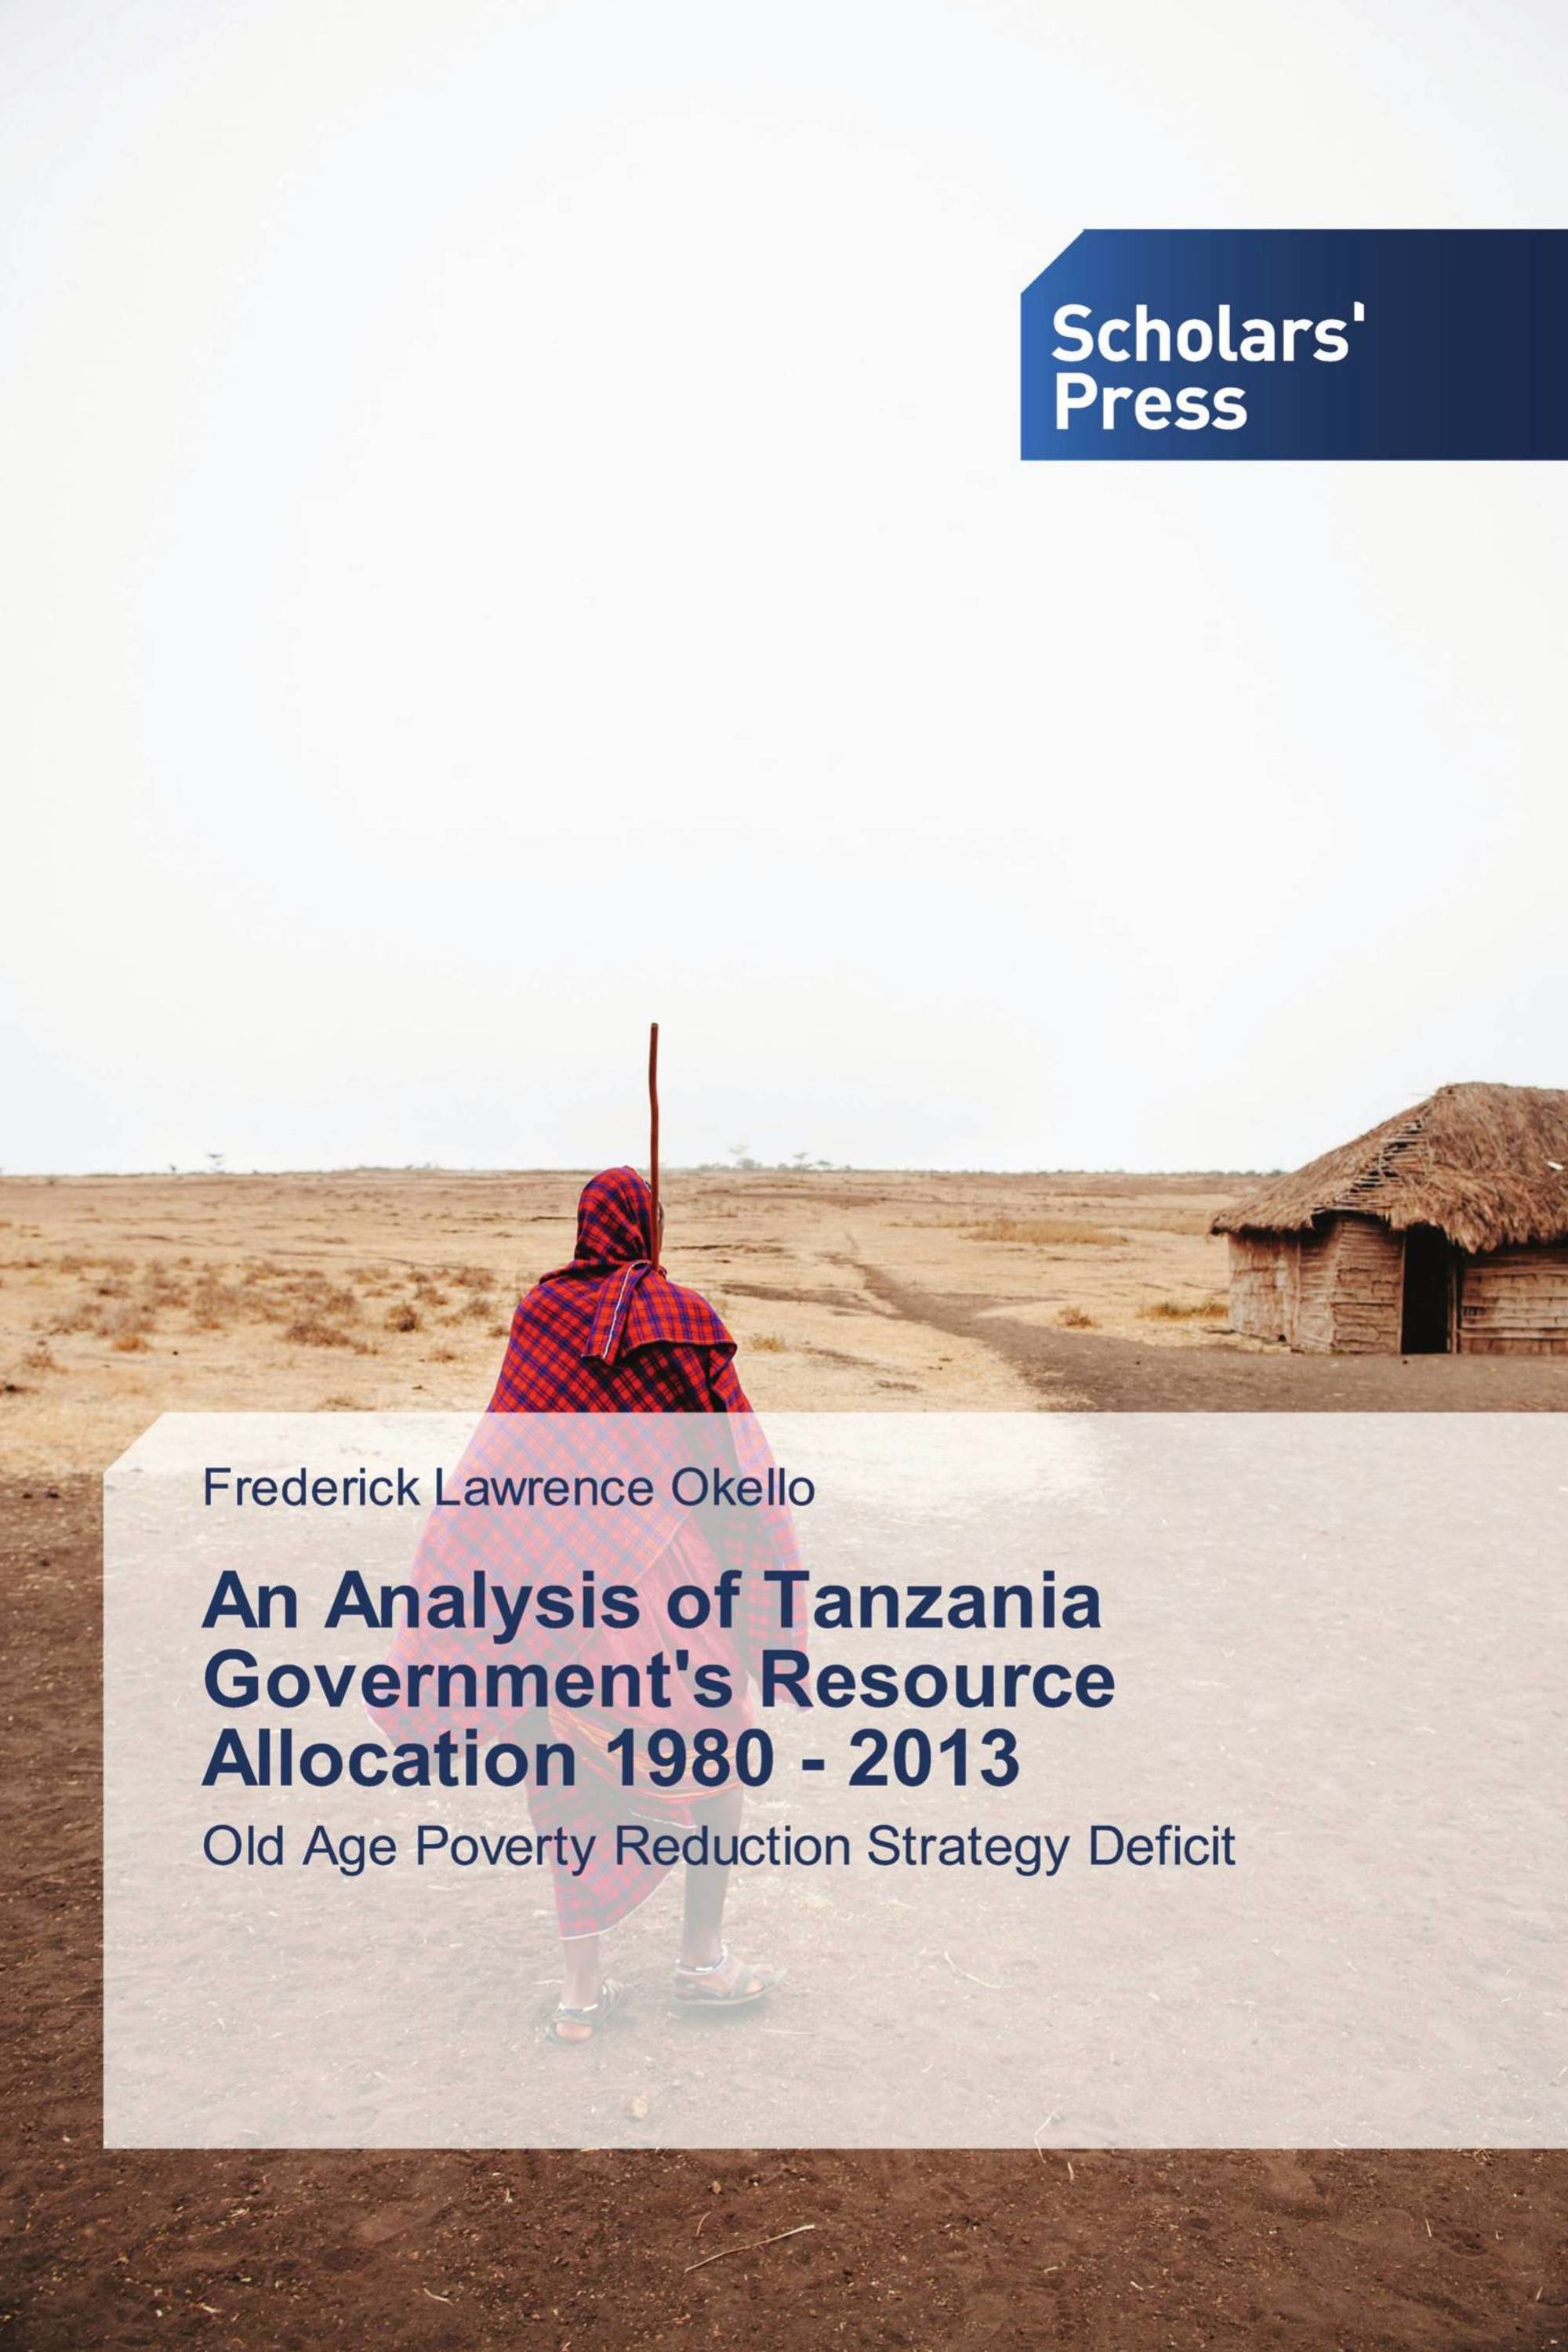 An Analysis of Tanzania Government's Resource Allocation 1980 - 2013